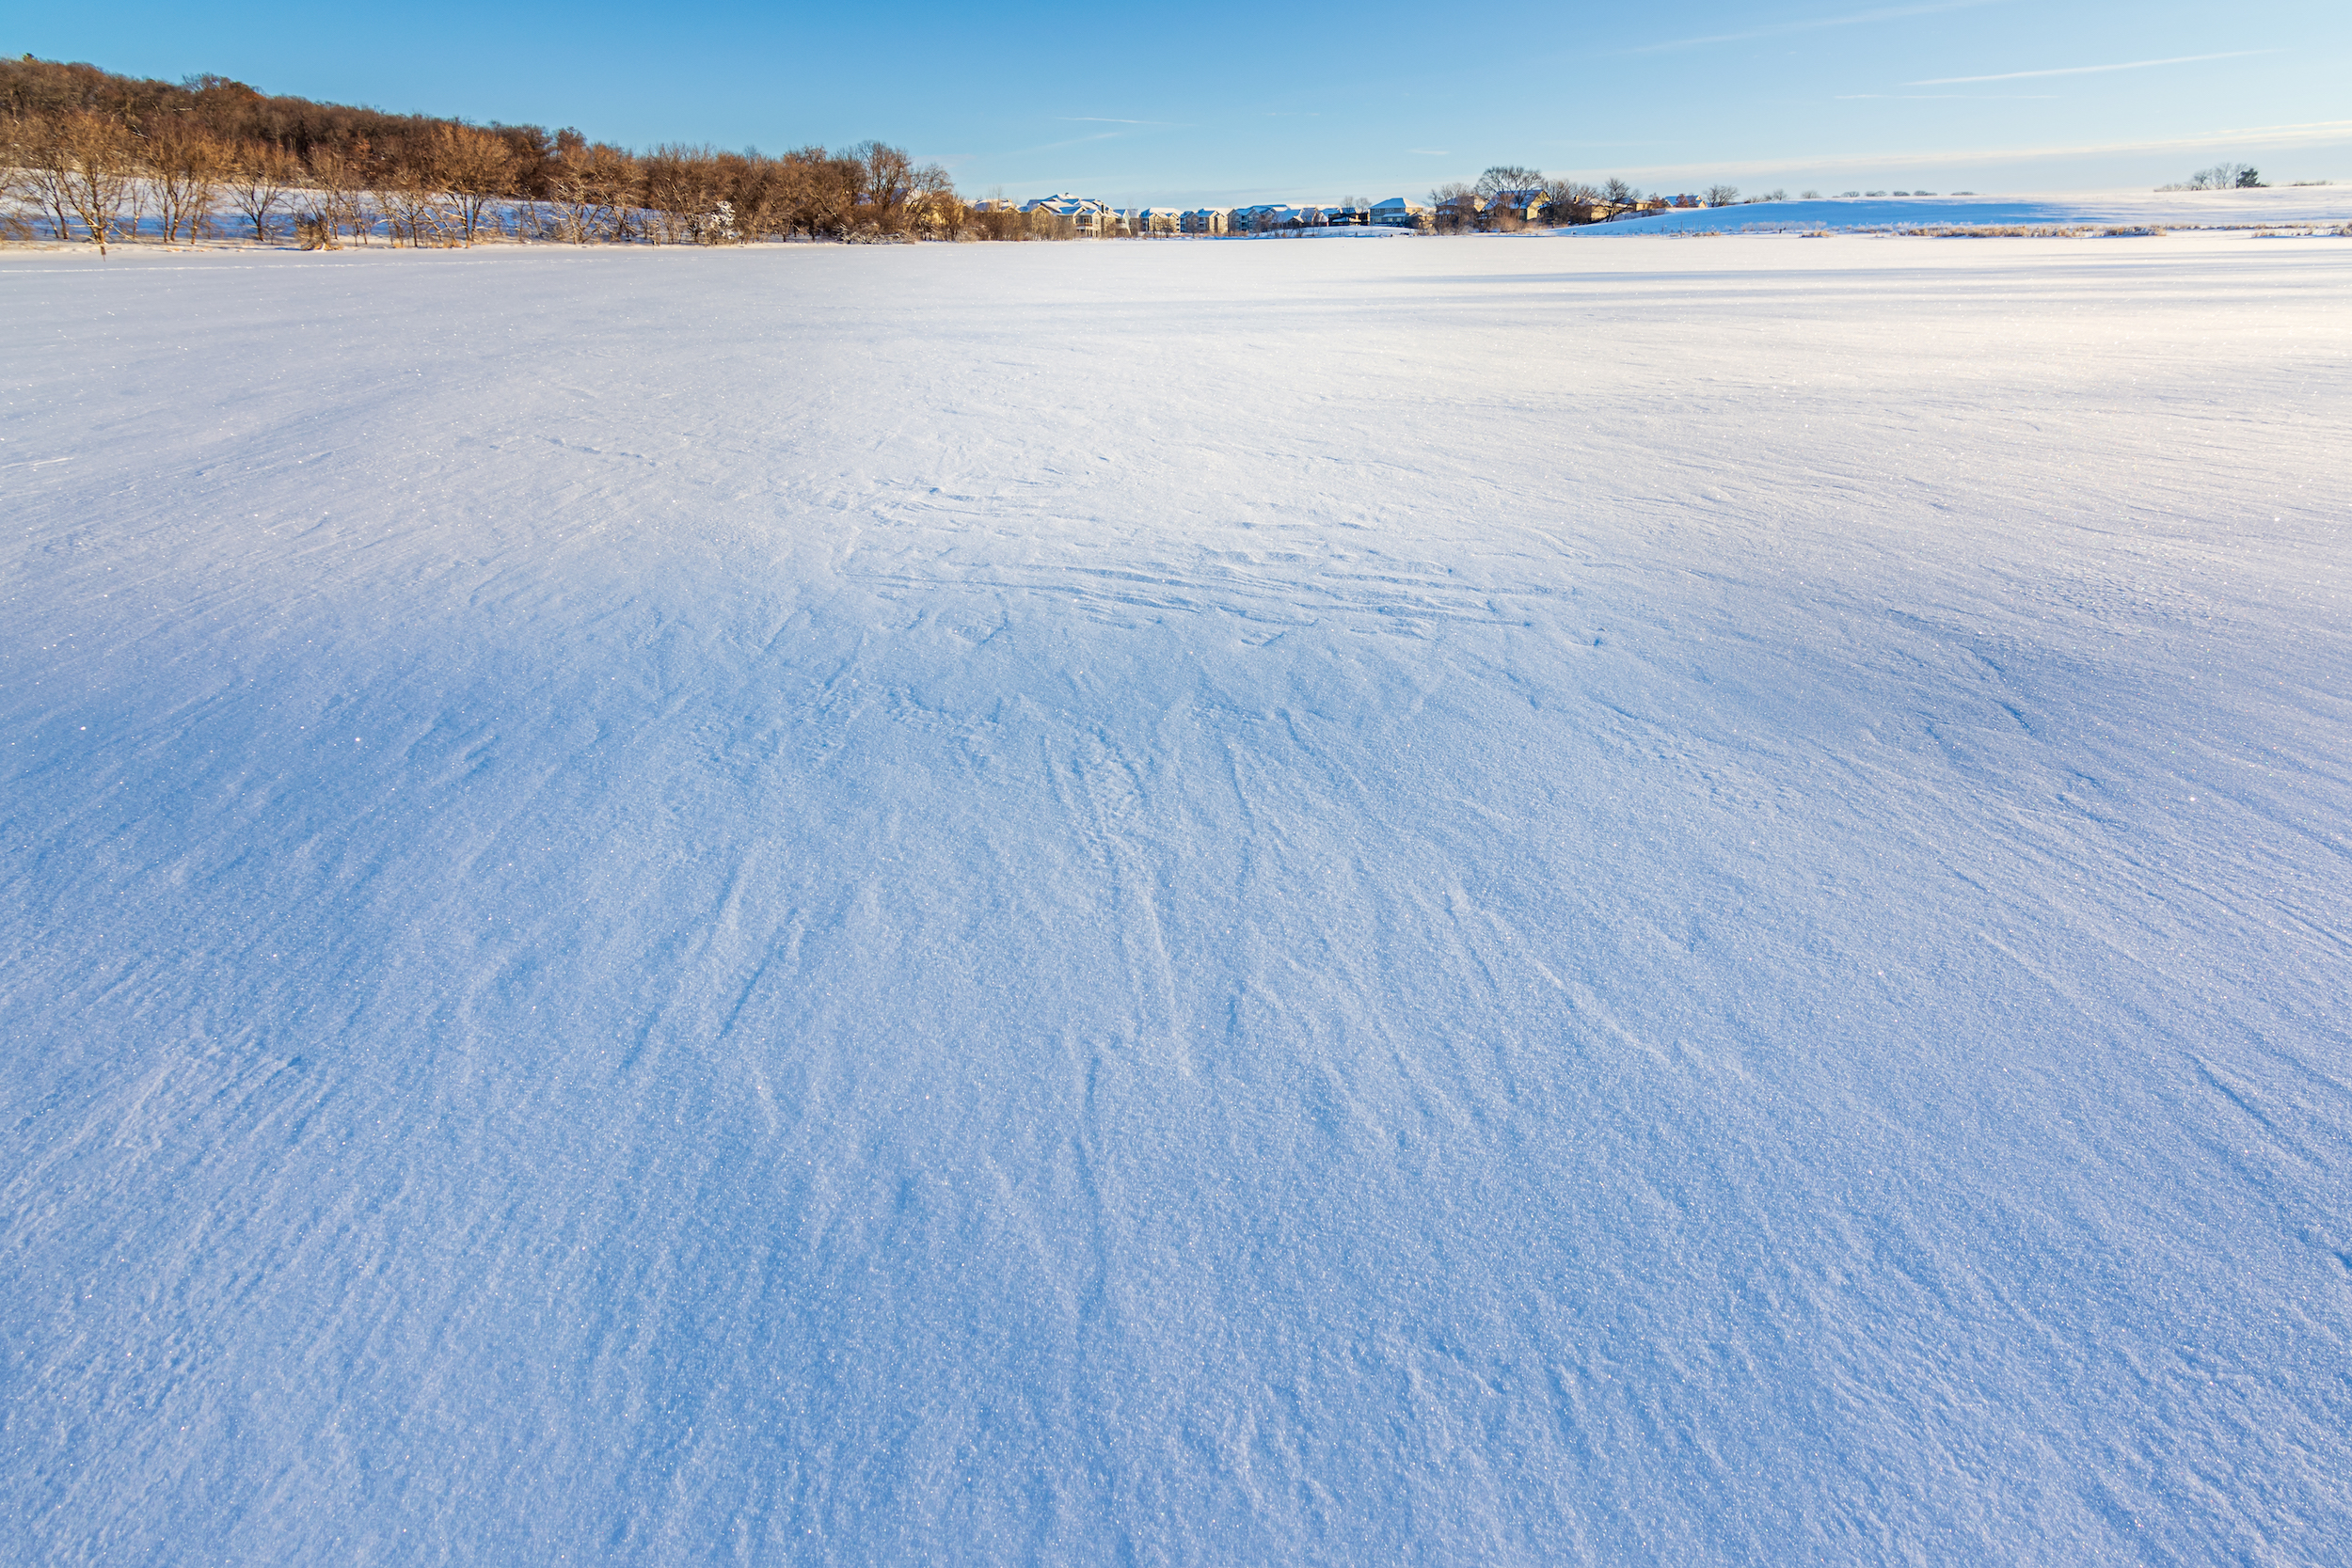 The view from the middle of a frozen Graber Pond in Middleton, Wis. on Feb. 1, 2021.